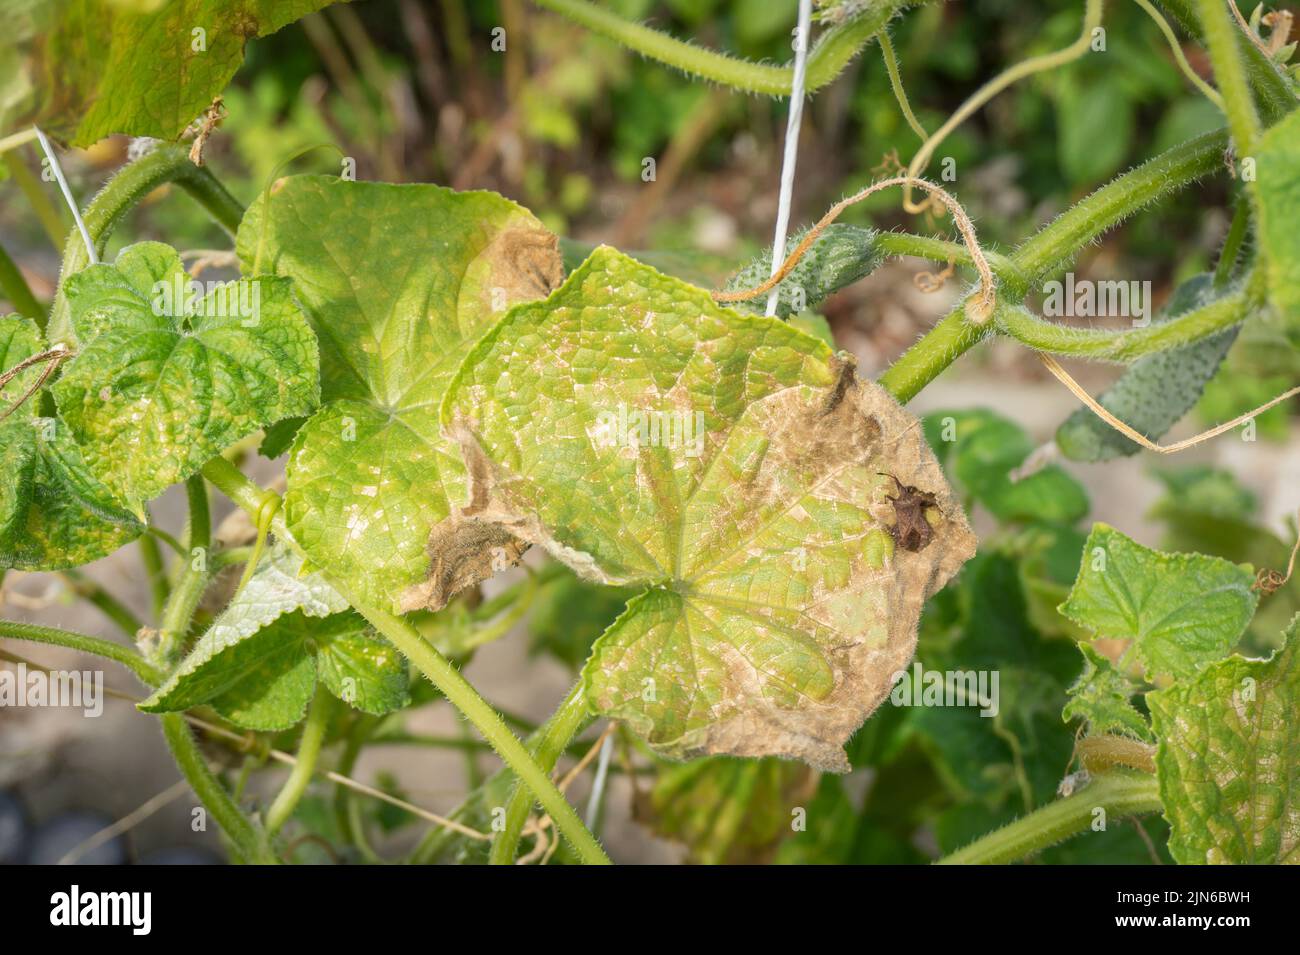 Cucumber leaves affected by downy mildew with a Picromerus bidens bug close-up. Cucumber disease Peronosporosis or False powdery mildew. Leaf with yellow spots. Stock Photo